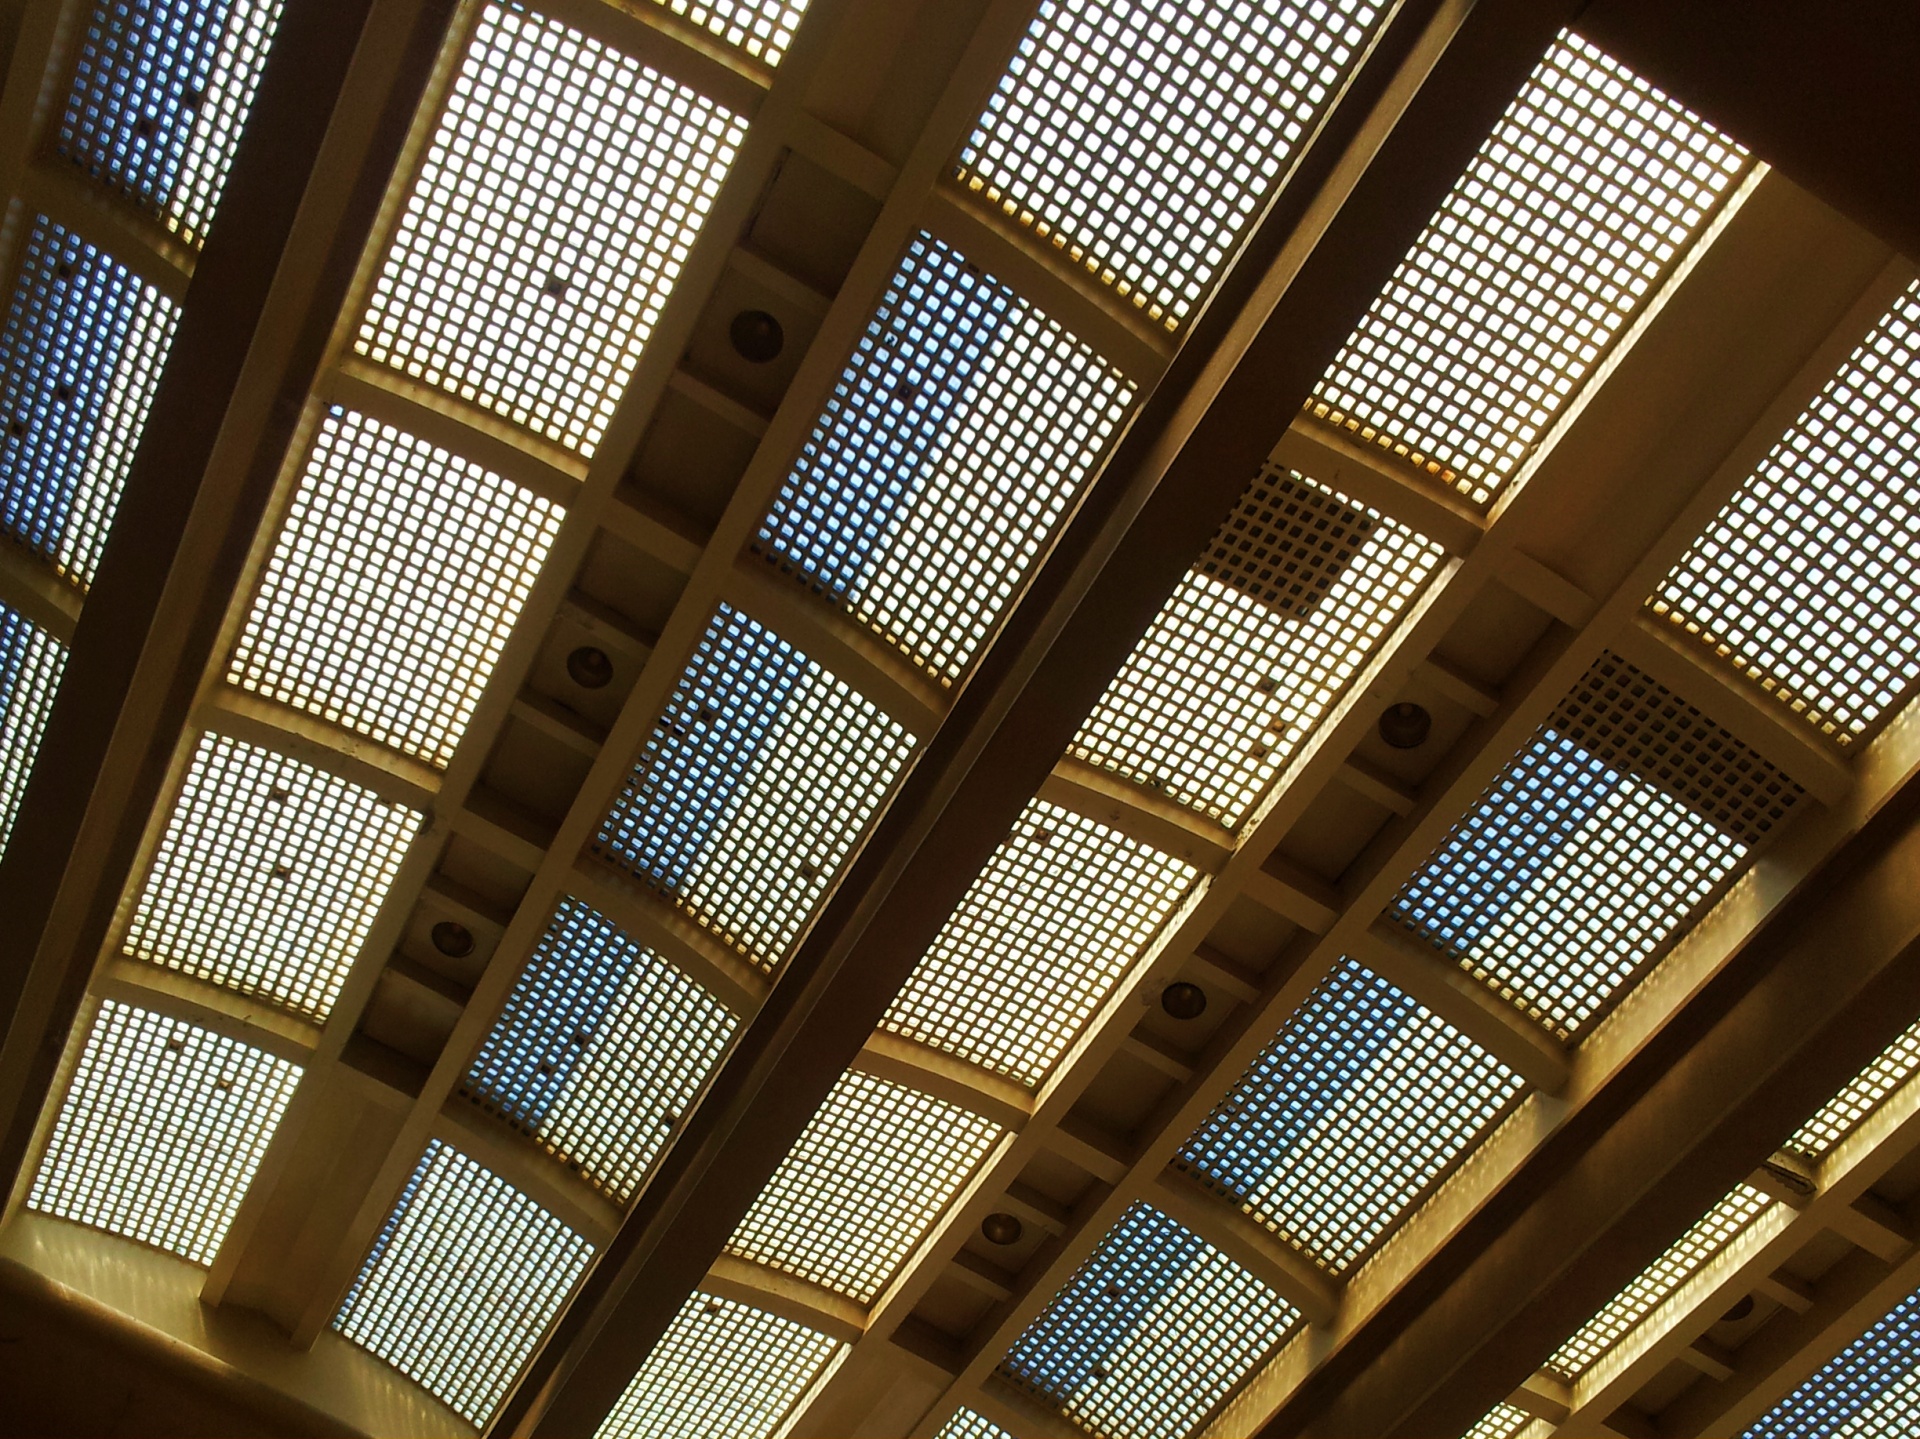 Railway station roof in Normandy, France